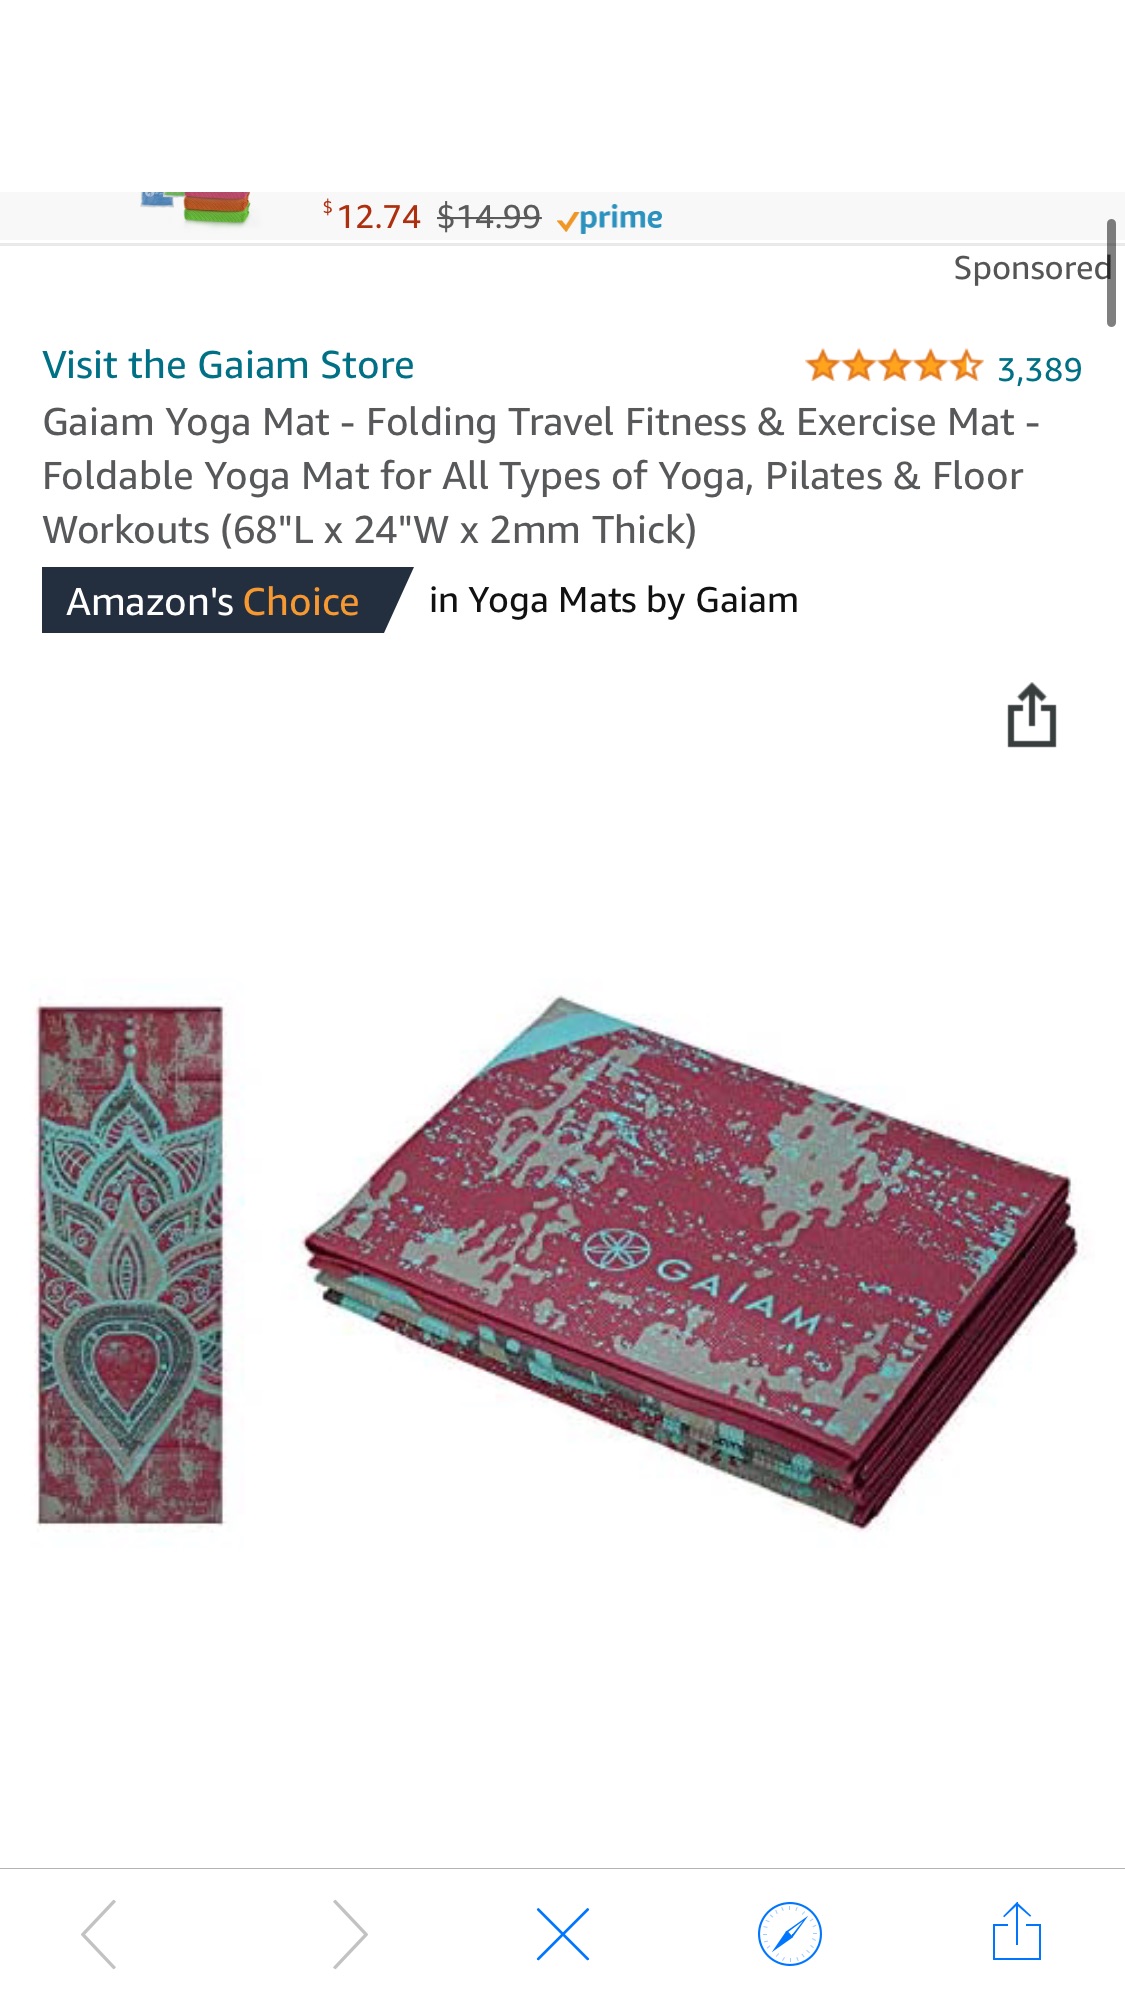 Gaiam Yoga Mat Folding Travel Fitness & Exercise Mat | Foldable Yoga Mat for All Types of Yoga, Pilates & Floor Workouts, Be Free, 2mm 旅行瑜伽垫